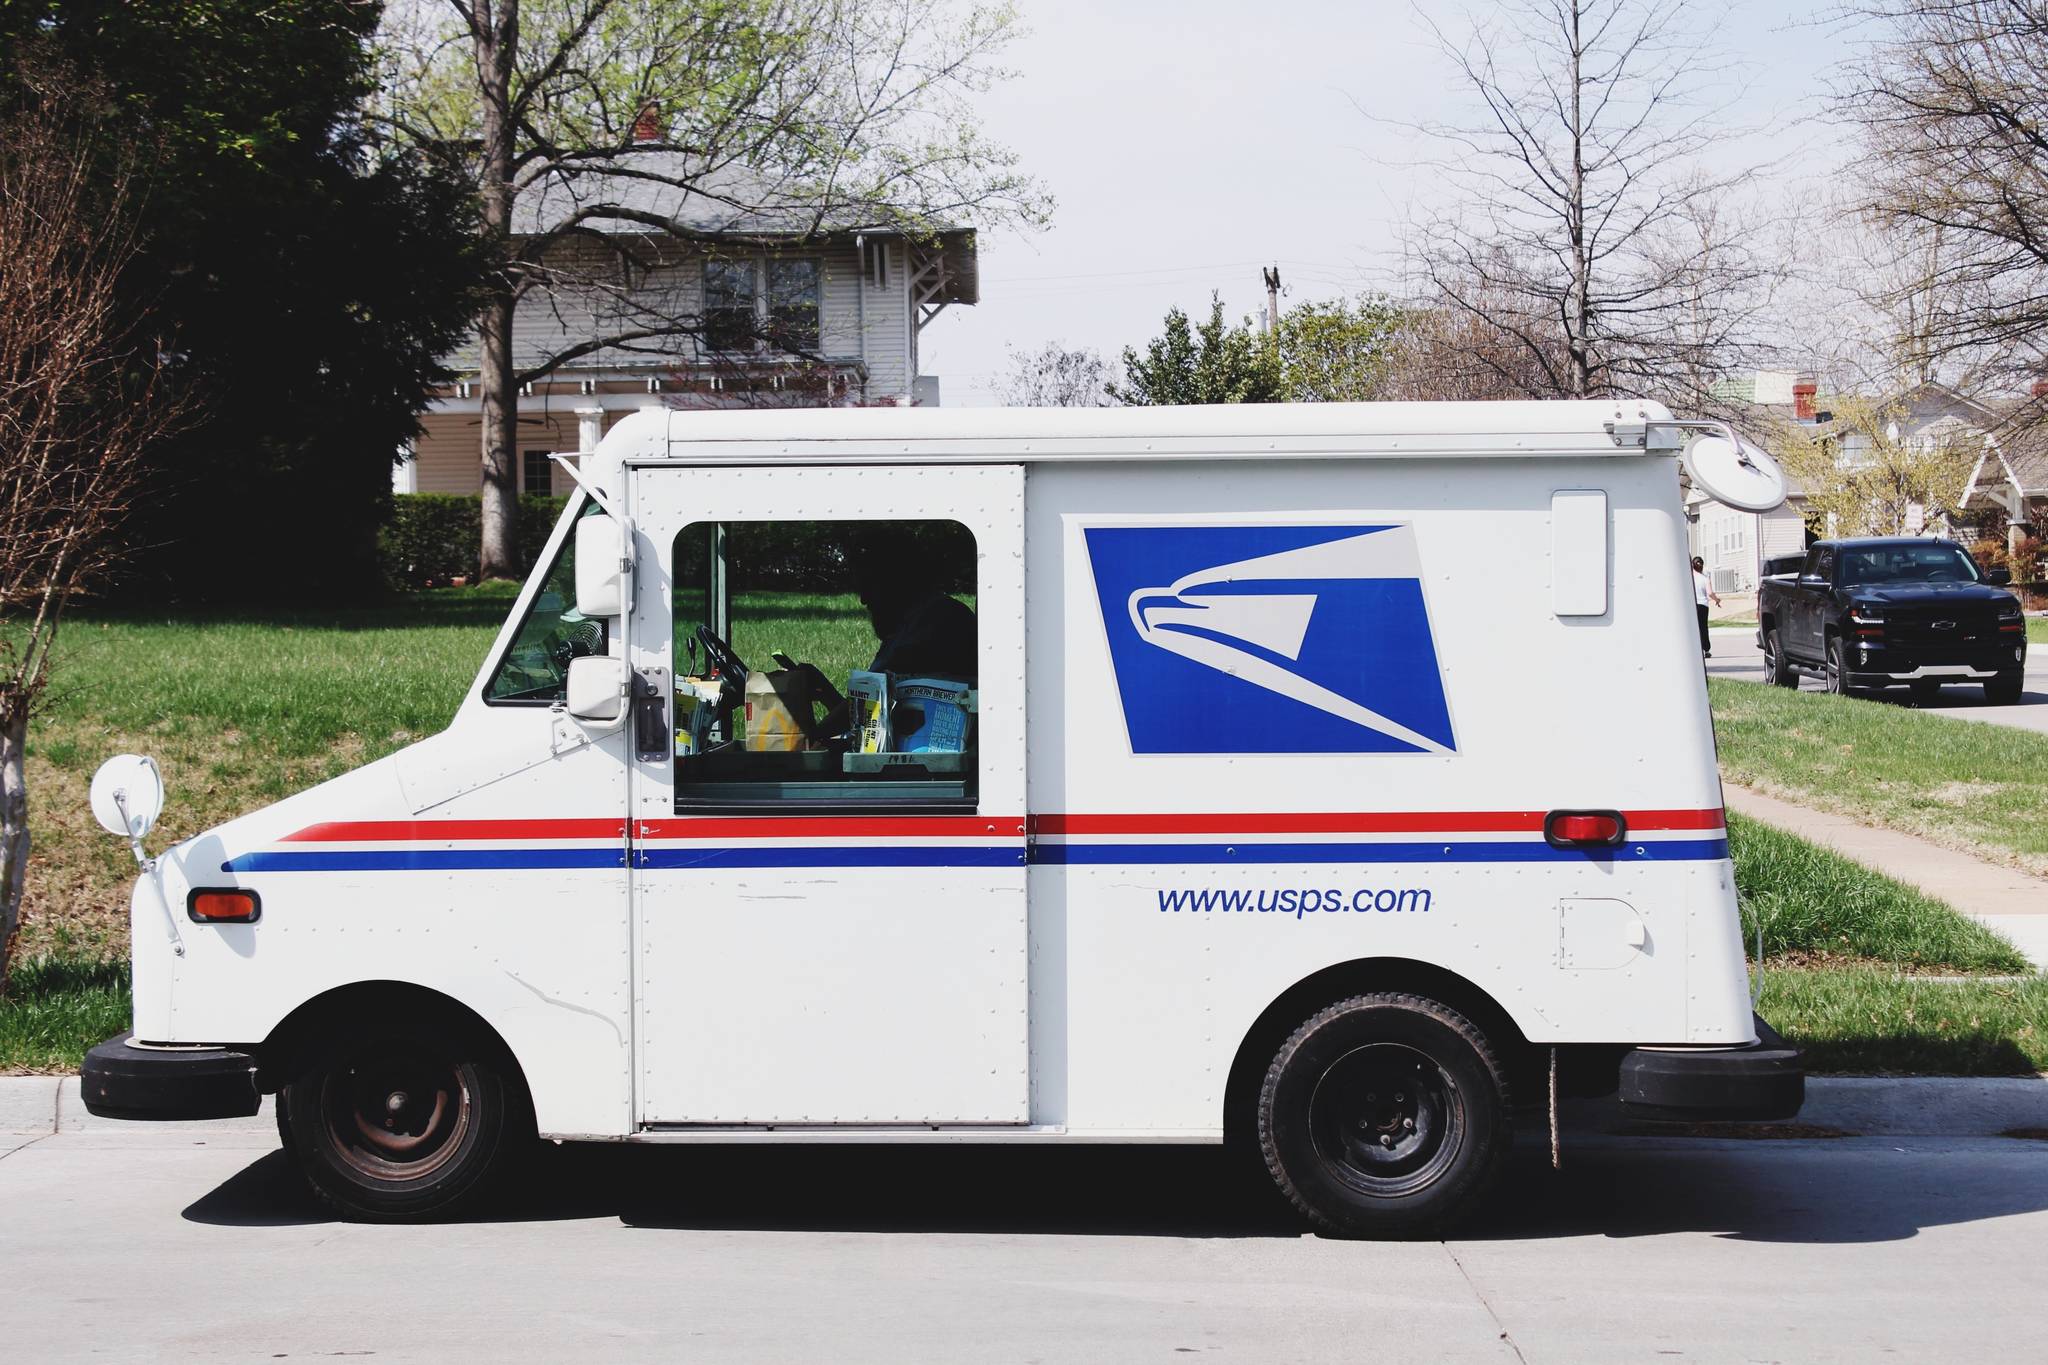 Opinion: New stimulus bill should include the Postal Service